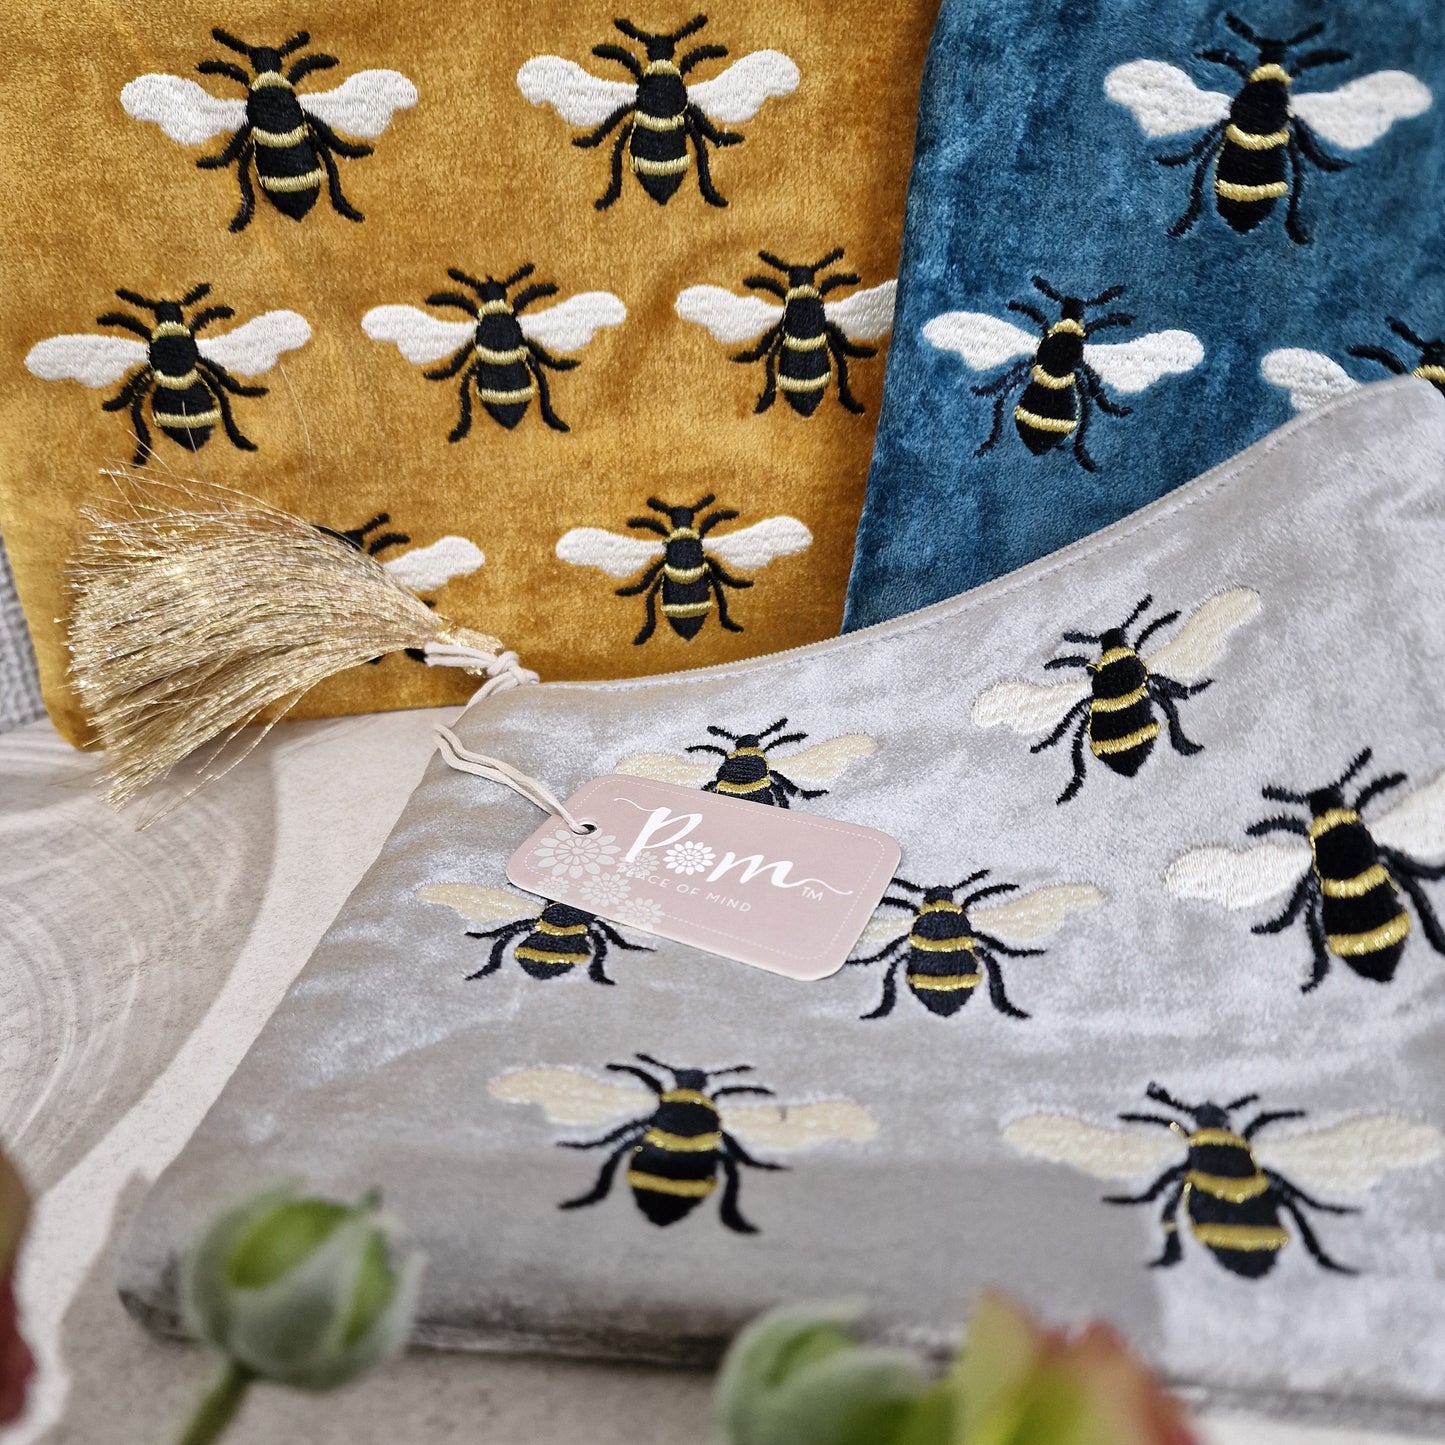 Bumble Bee Velvet Dove Grey Pouch Make Up Bag by POM